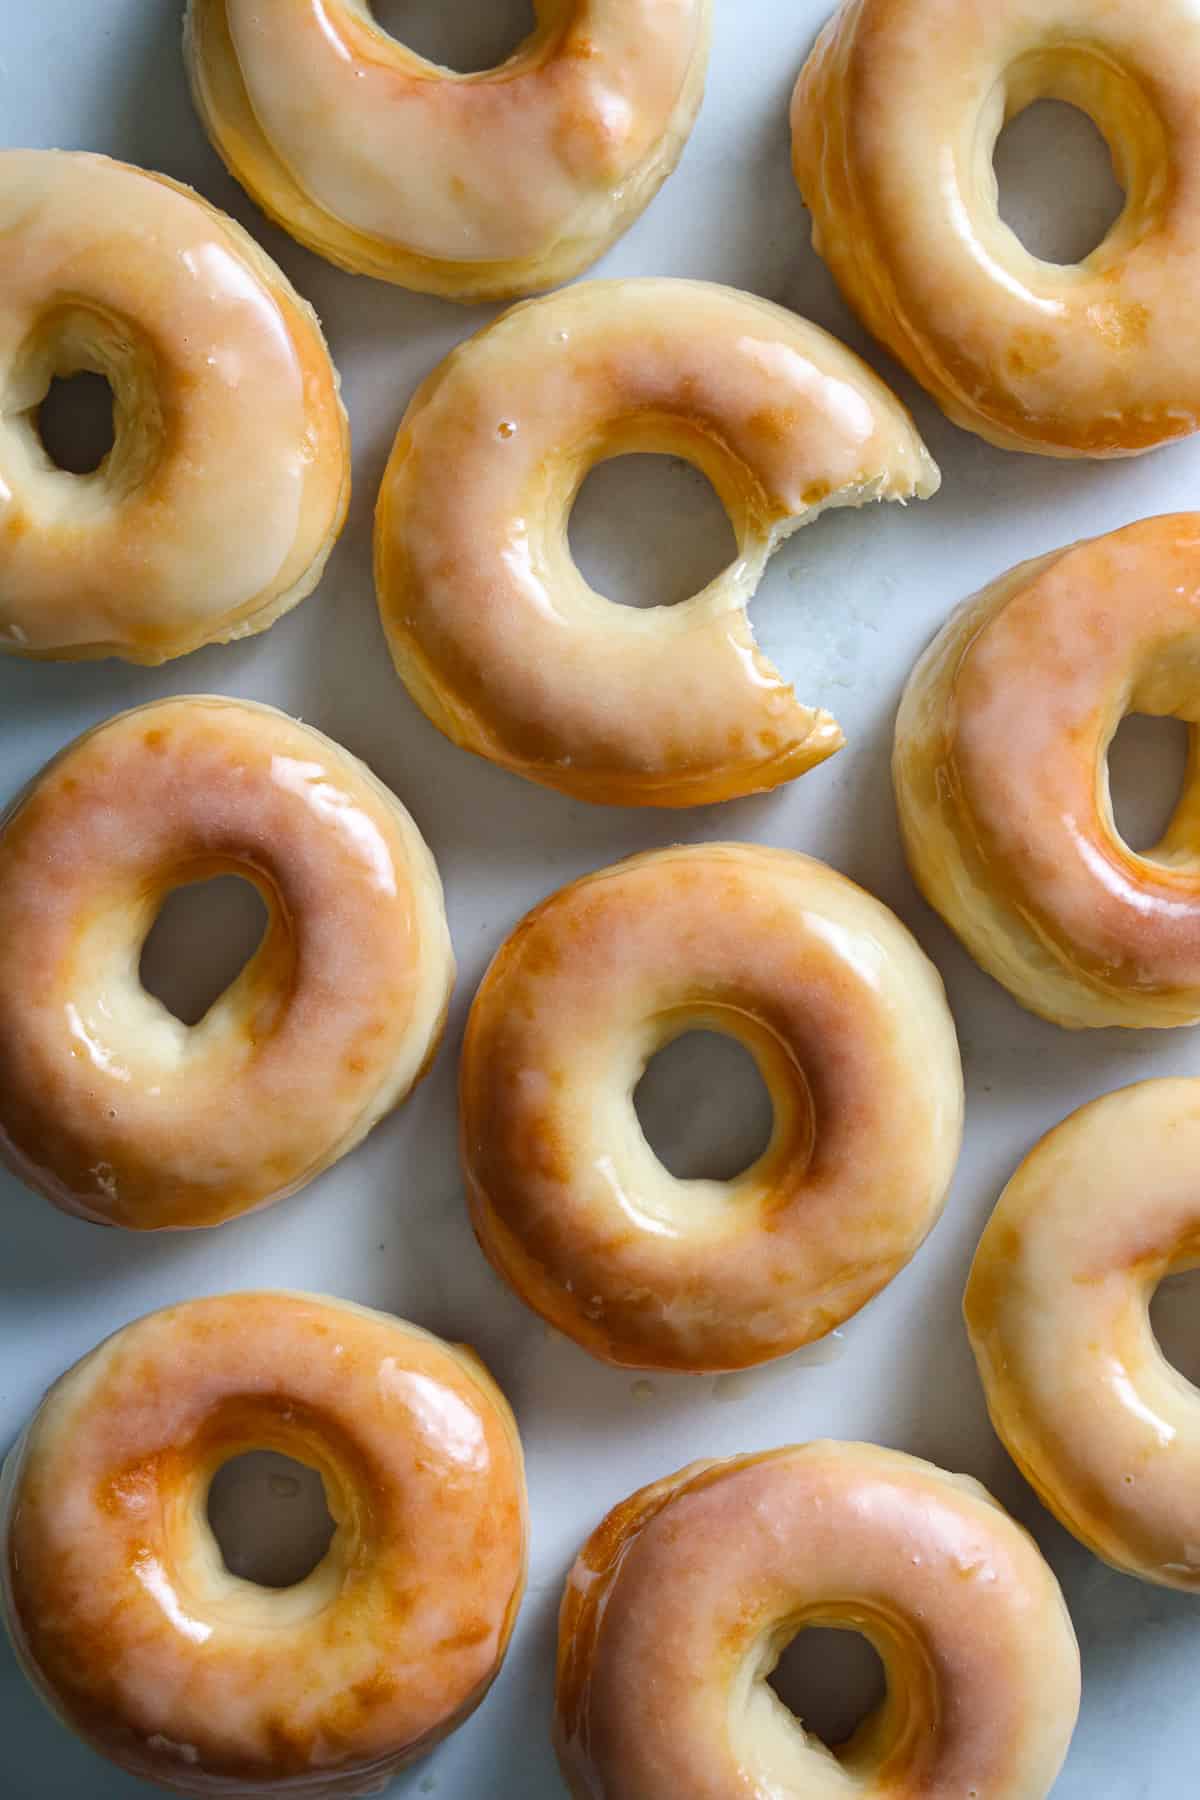 Glazed Air Fryer Donuts (from scratch) VIDEO - Simply Home Cooked